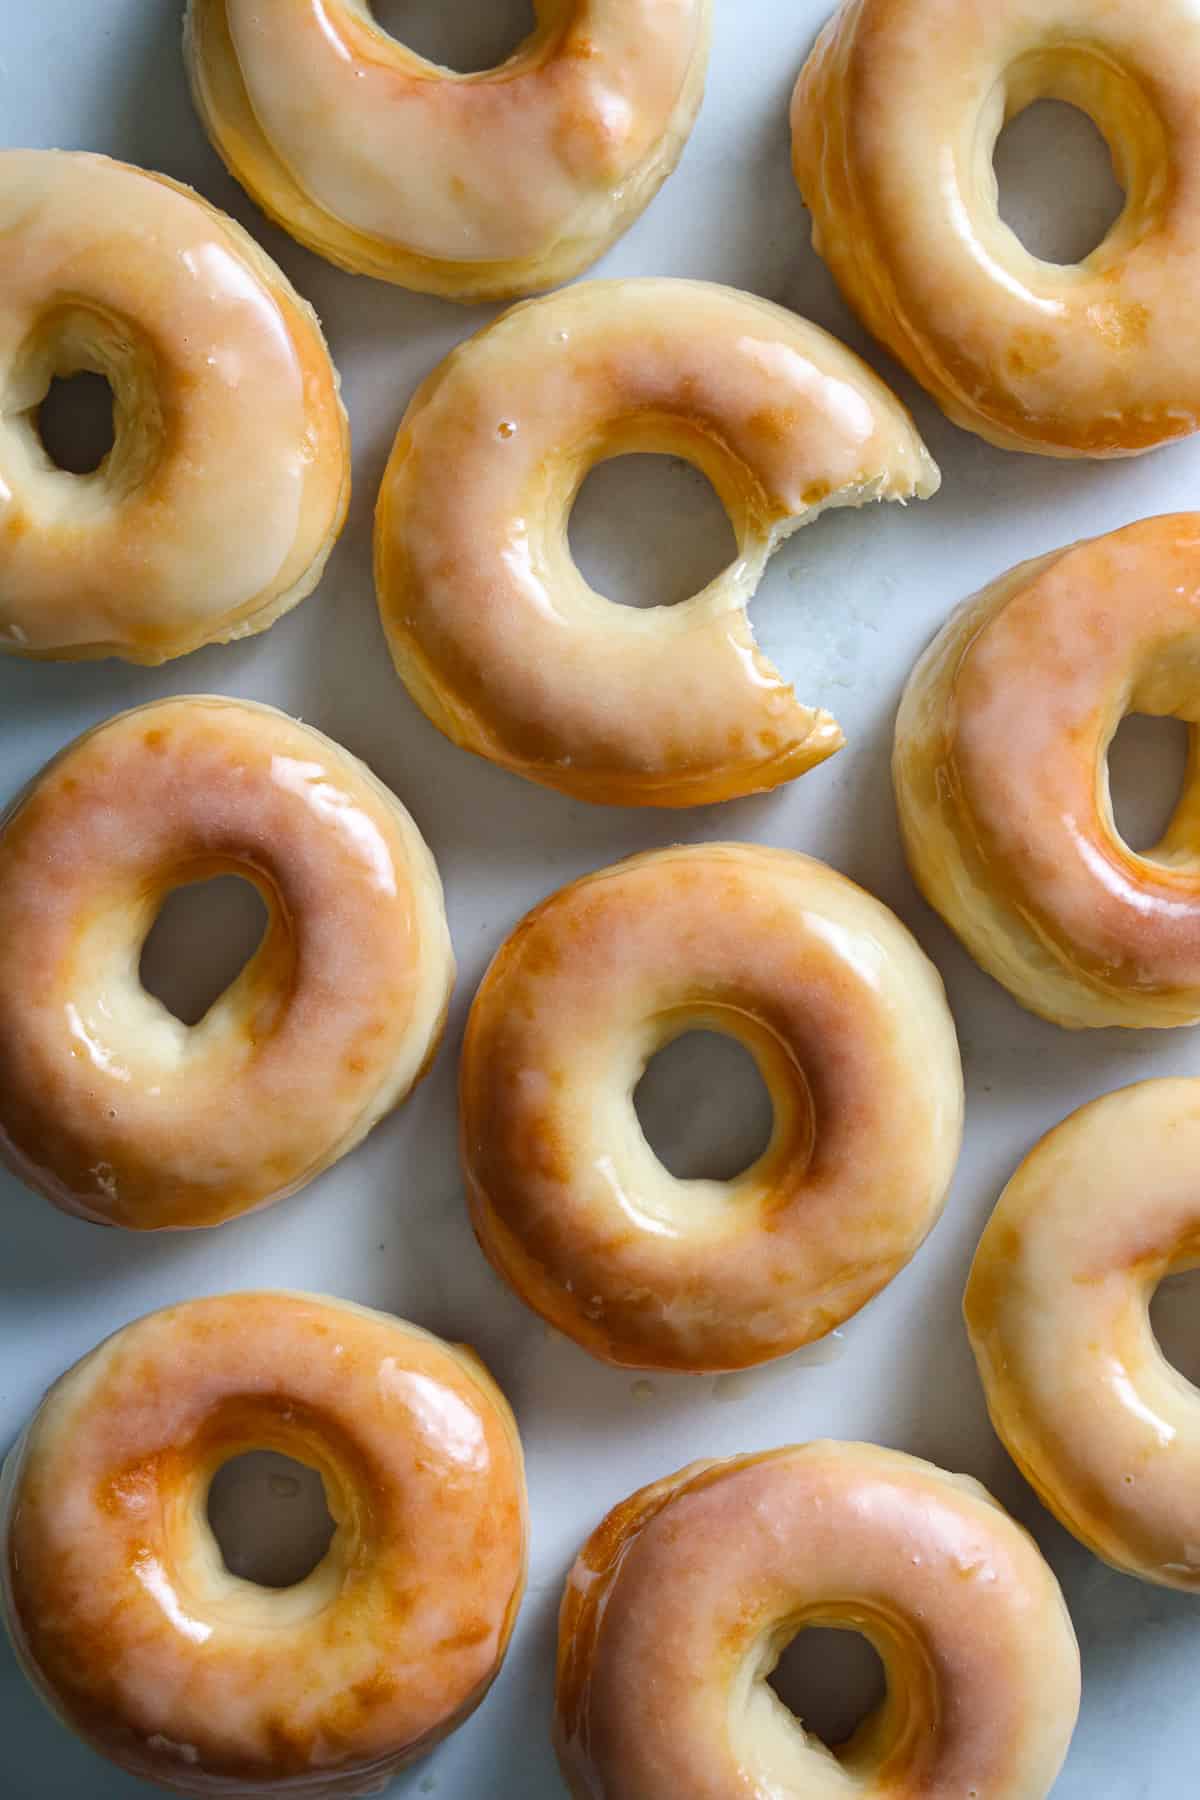 Glazed Air Fryer Donuts (from scratch) VIDEO - Simply Home Cooked